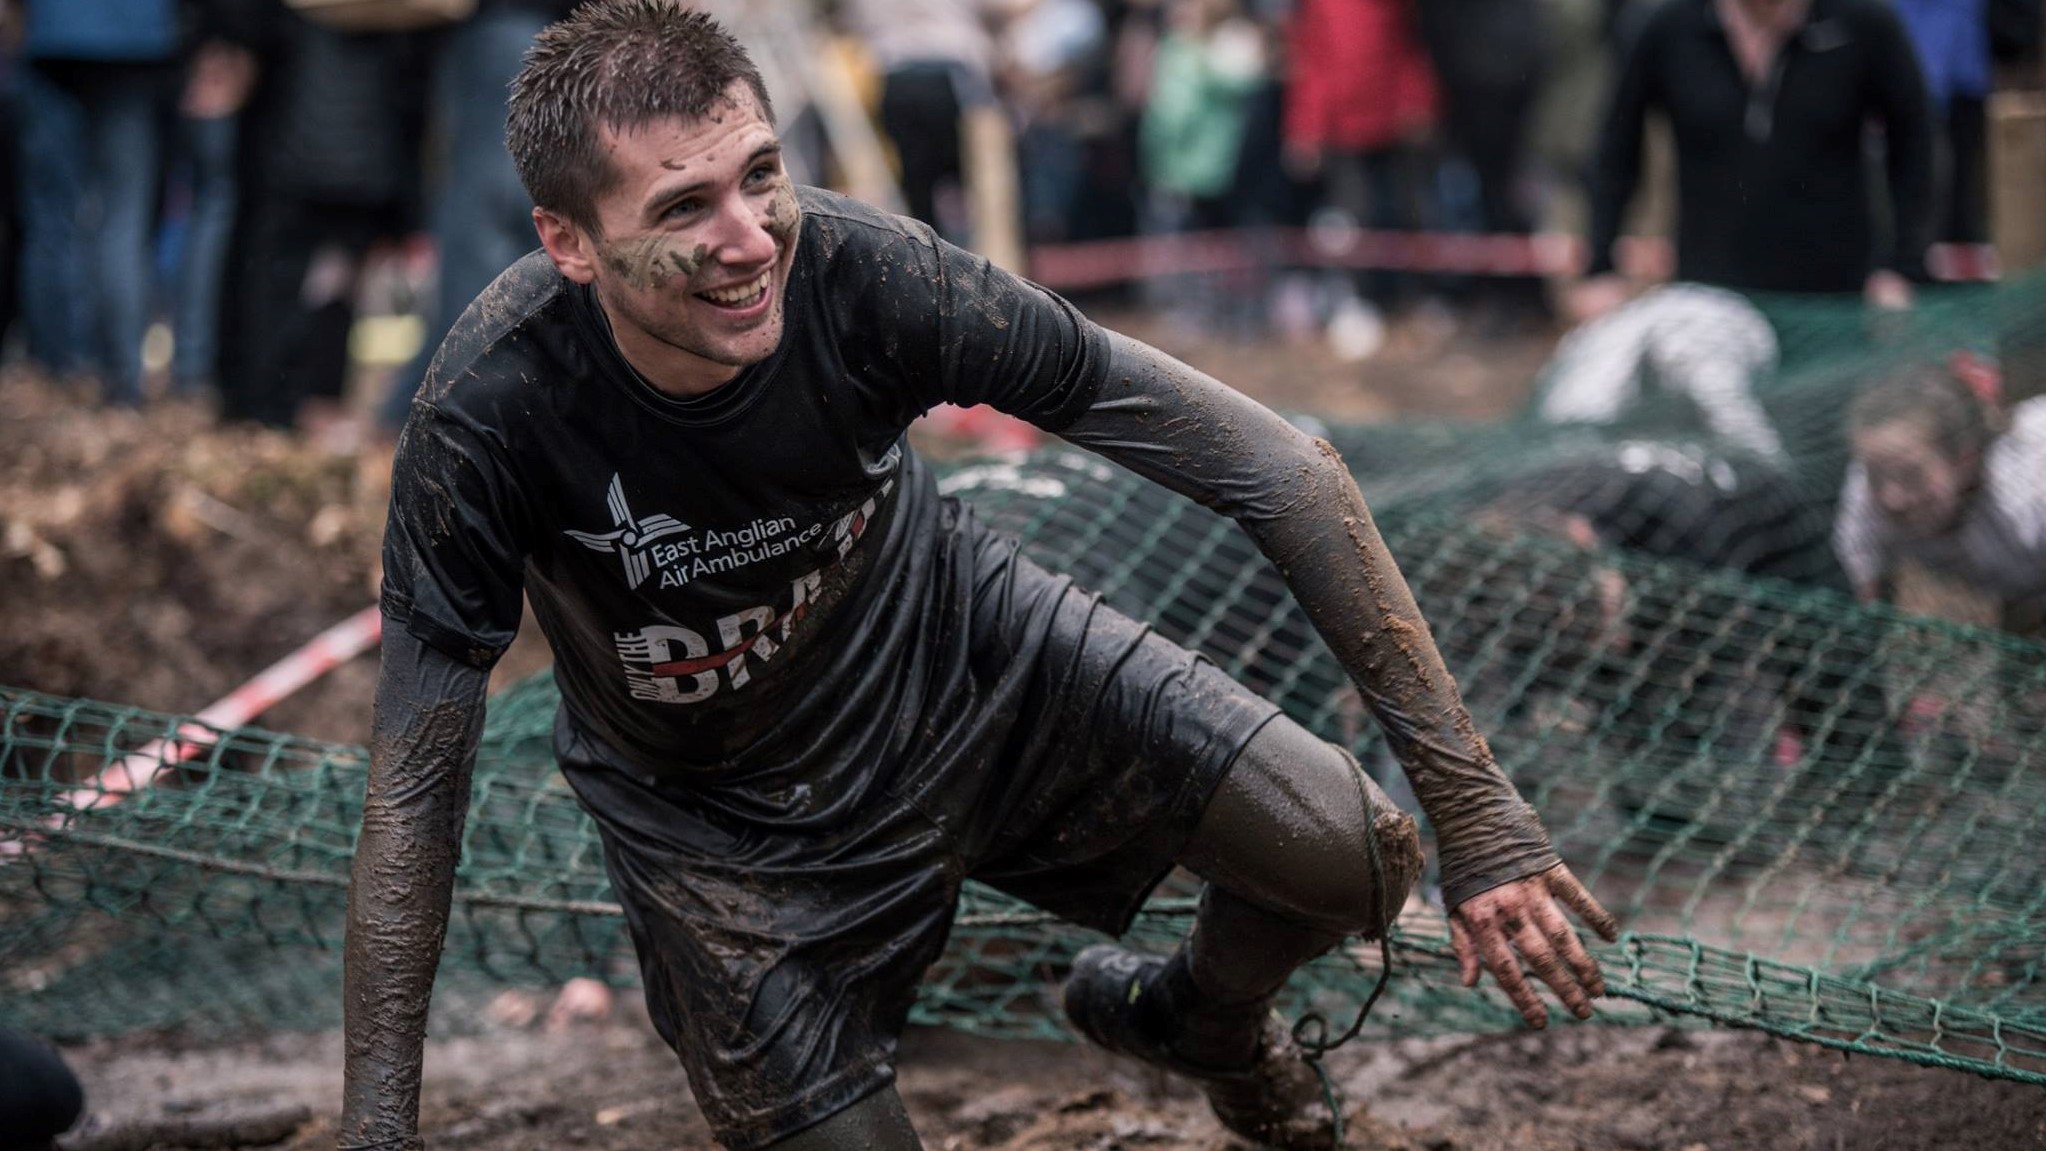 Only The Brave - Charity Obstacle Course Race (OCR) 2023